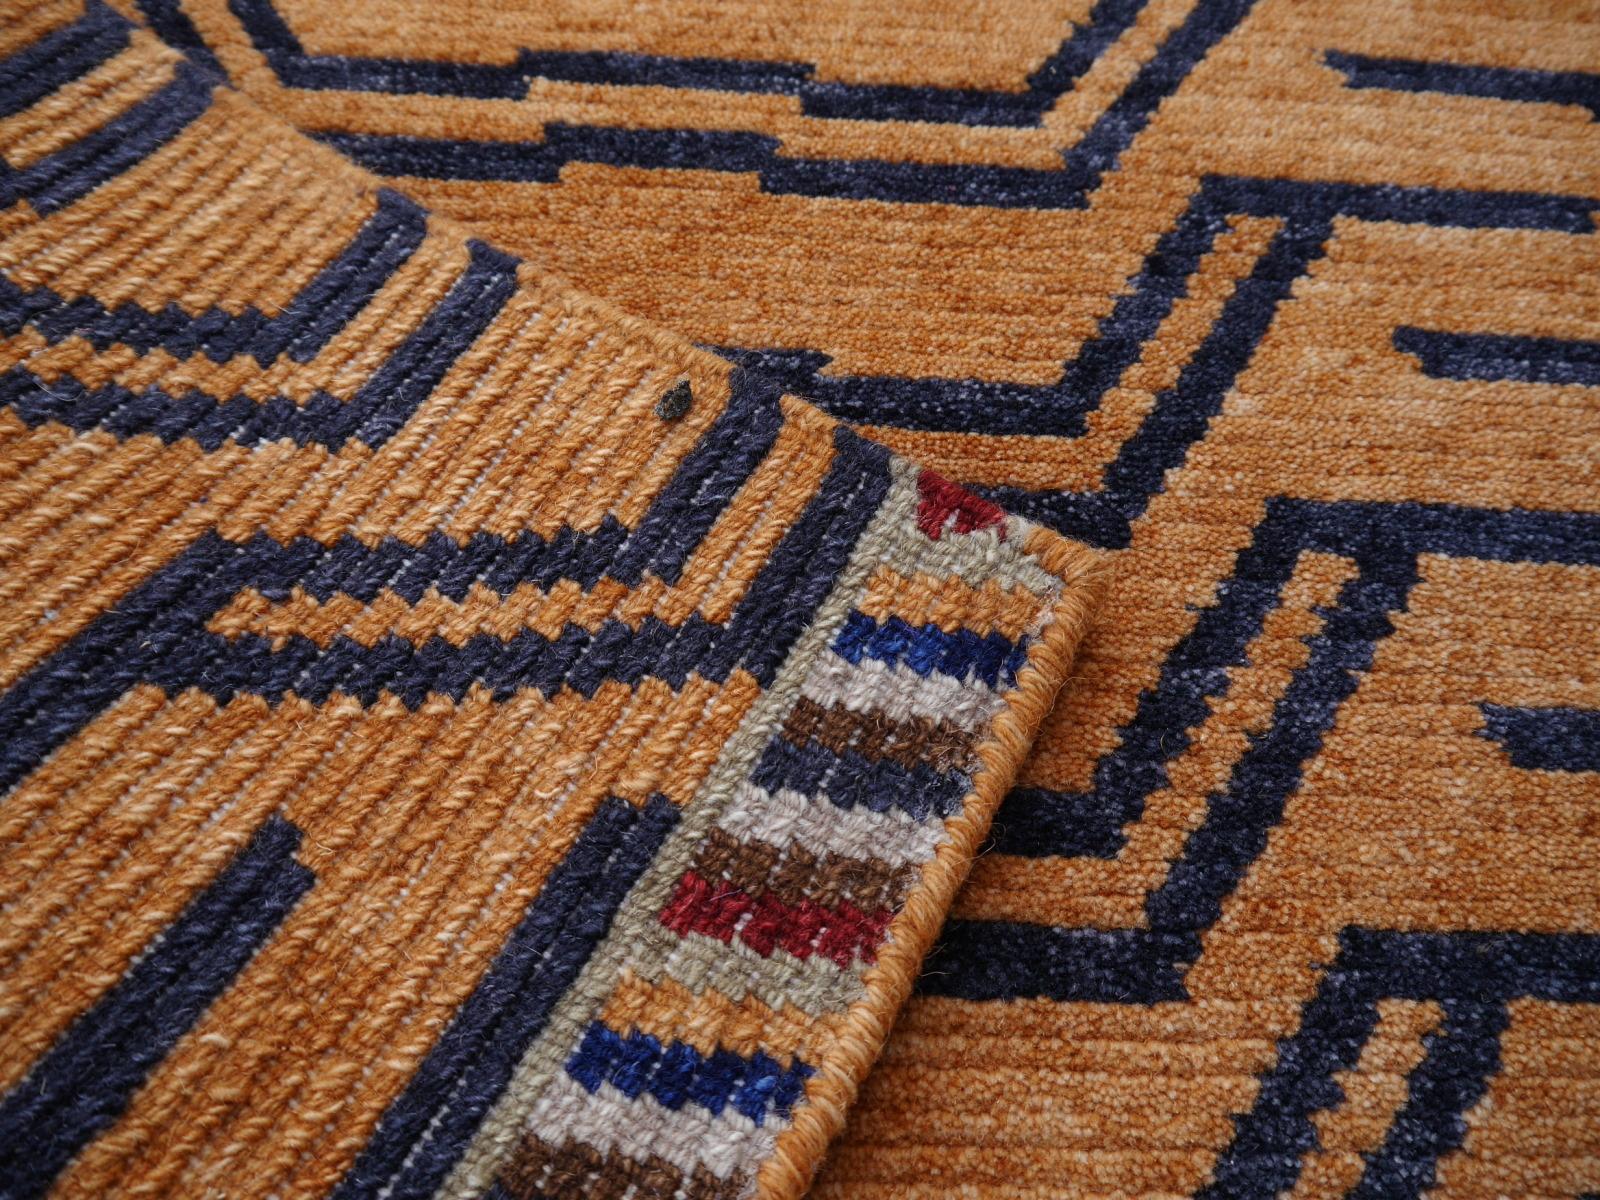 Contemporary Tibetan Tiger Rug Pure Wool Hand Knotted by Djoharian Collection Antique Design For Sale